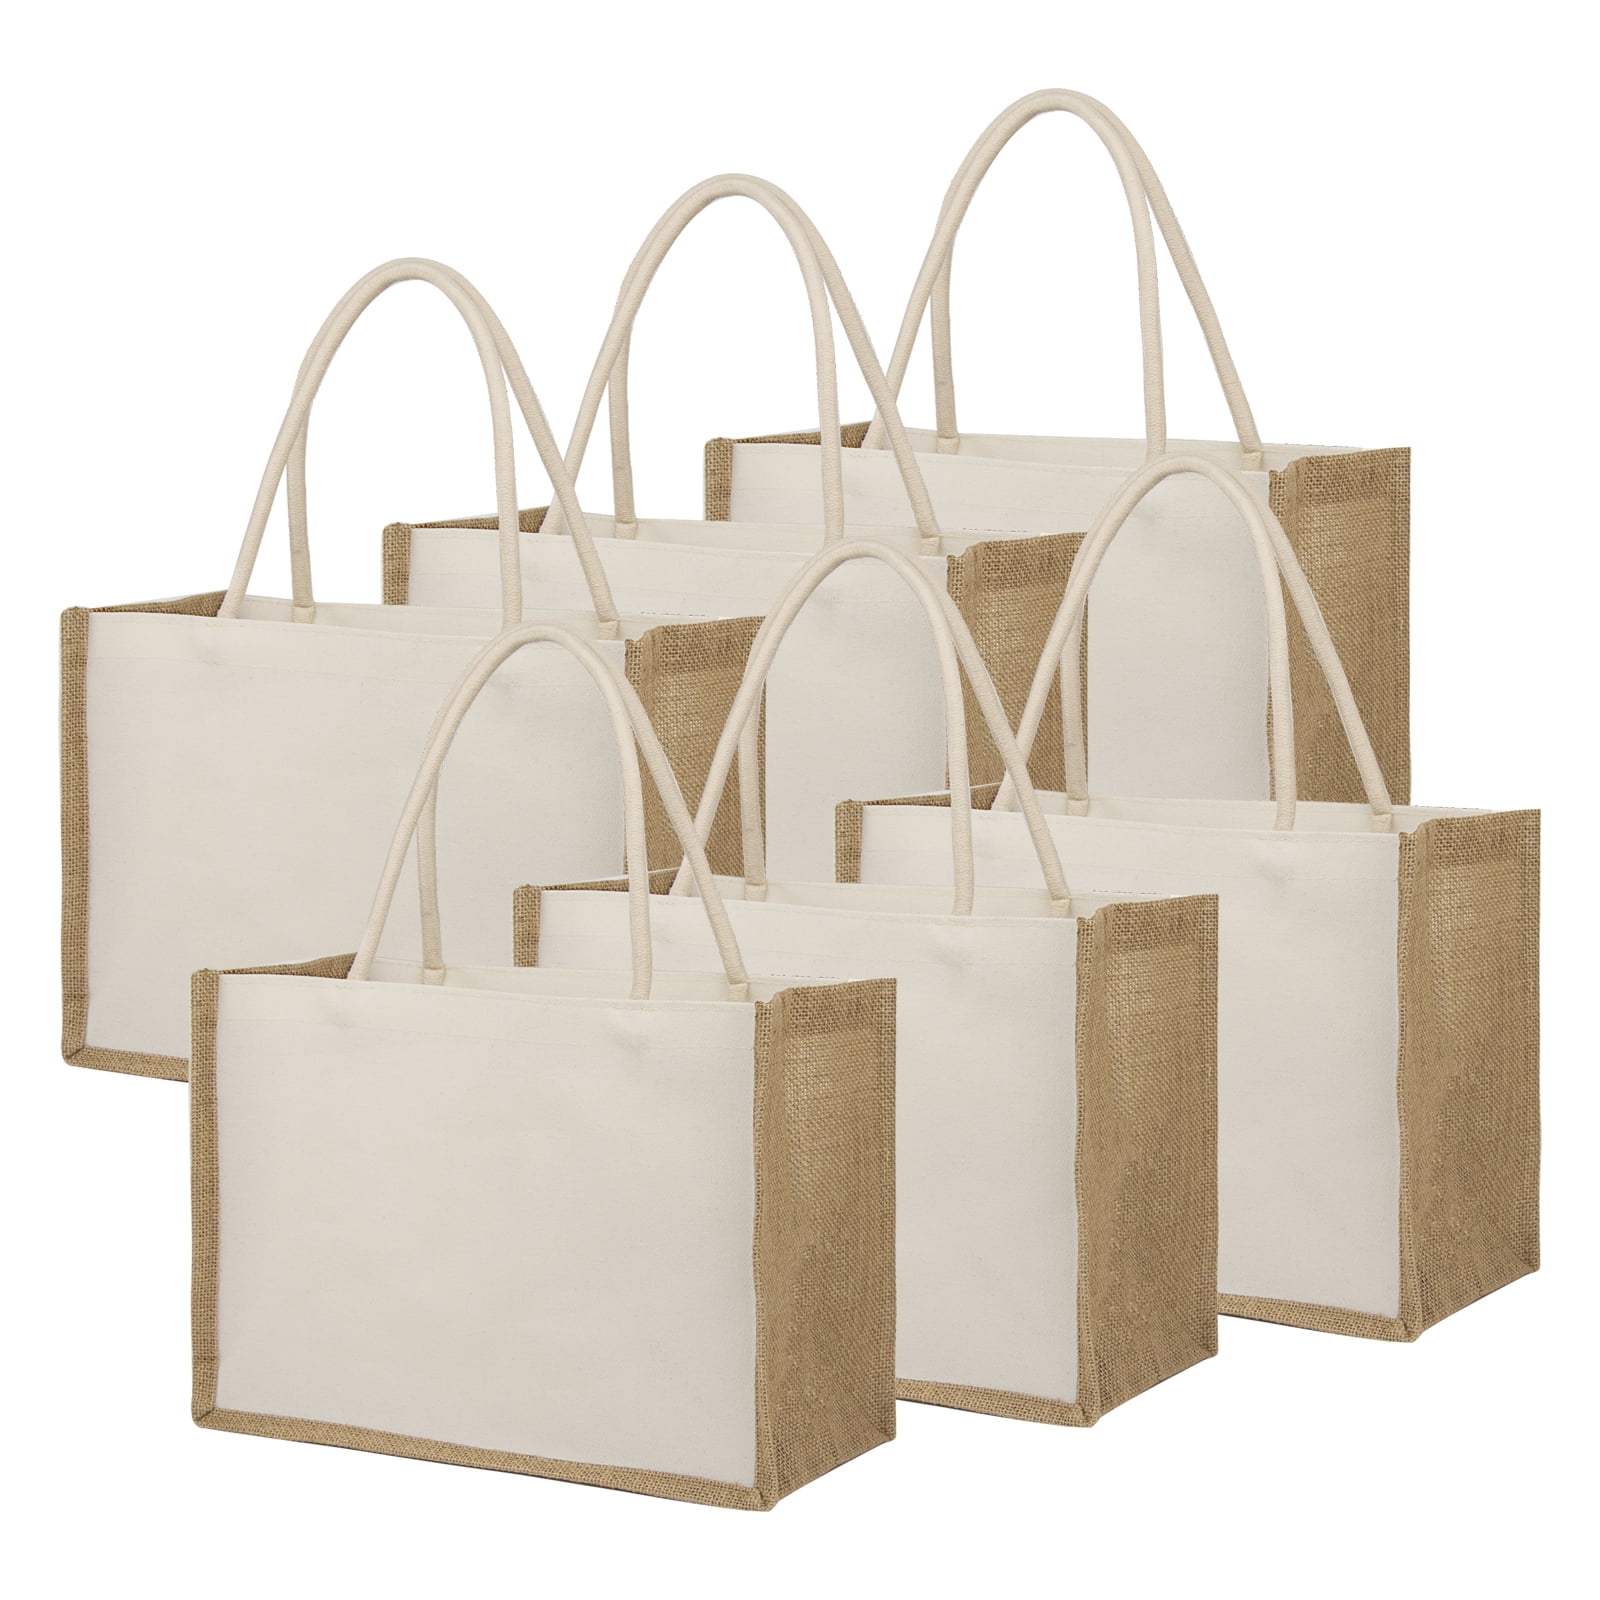 6 Packs Large Canvas Tote Bags, Segarty 20x15 inch Reusable Grocery Bags, Heavy